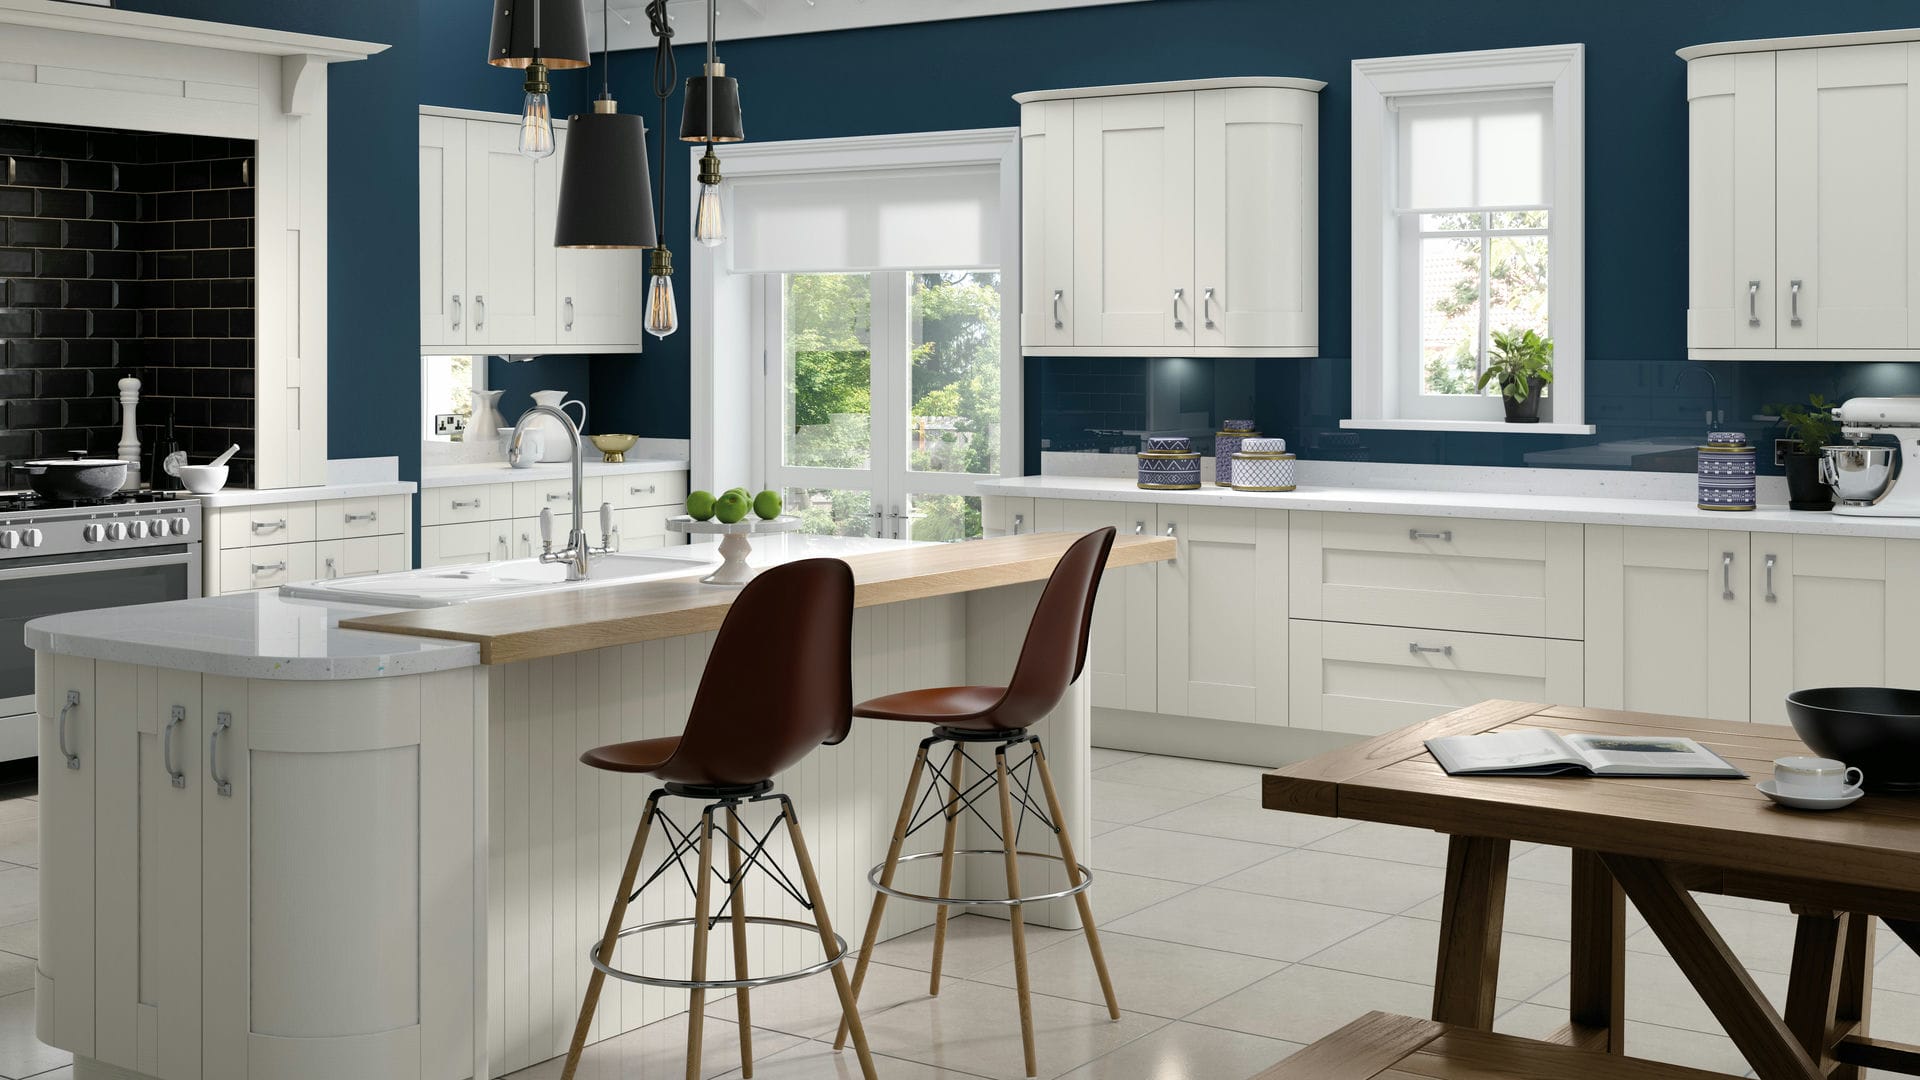 Luxury shaker style white kitchen doors and units, combining traditional design with a fresh, modern feel